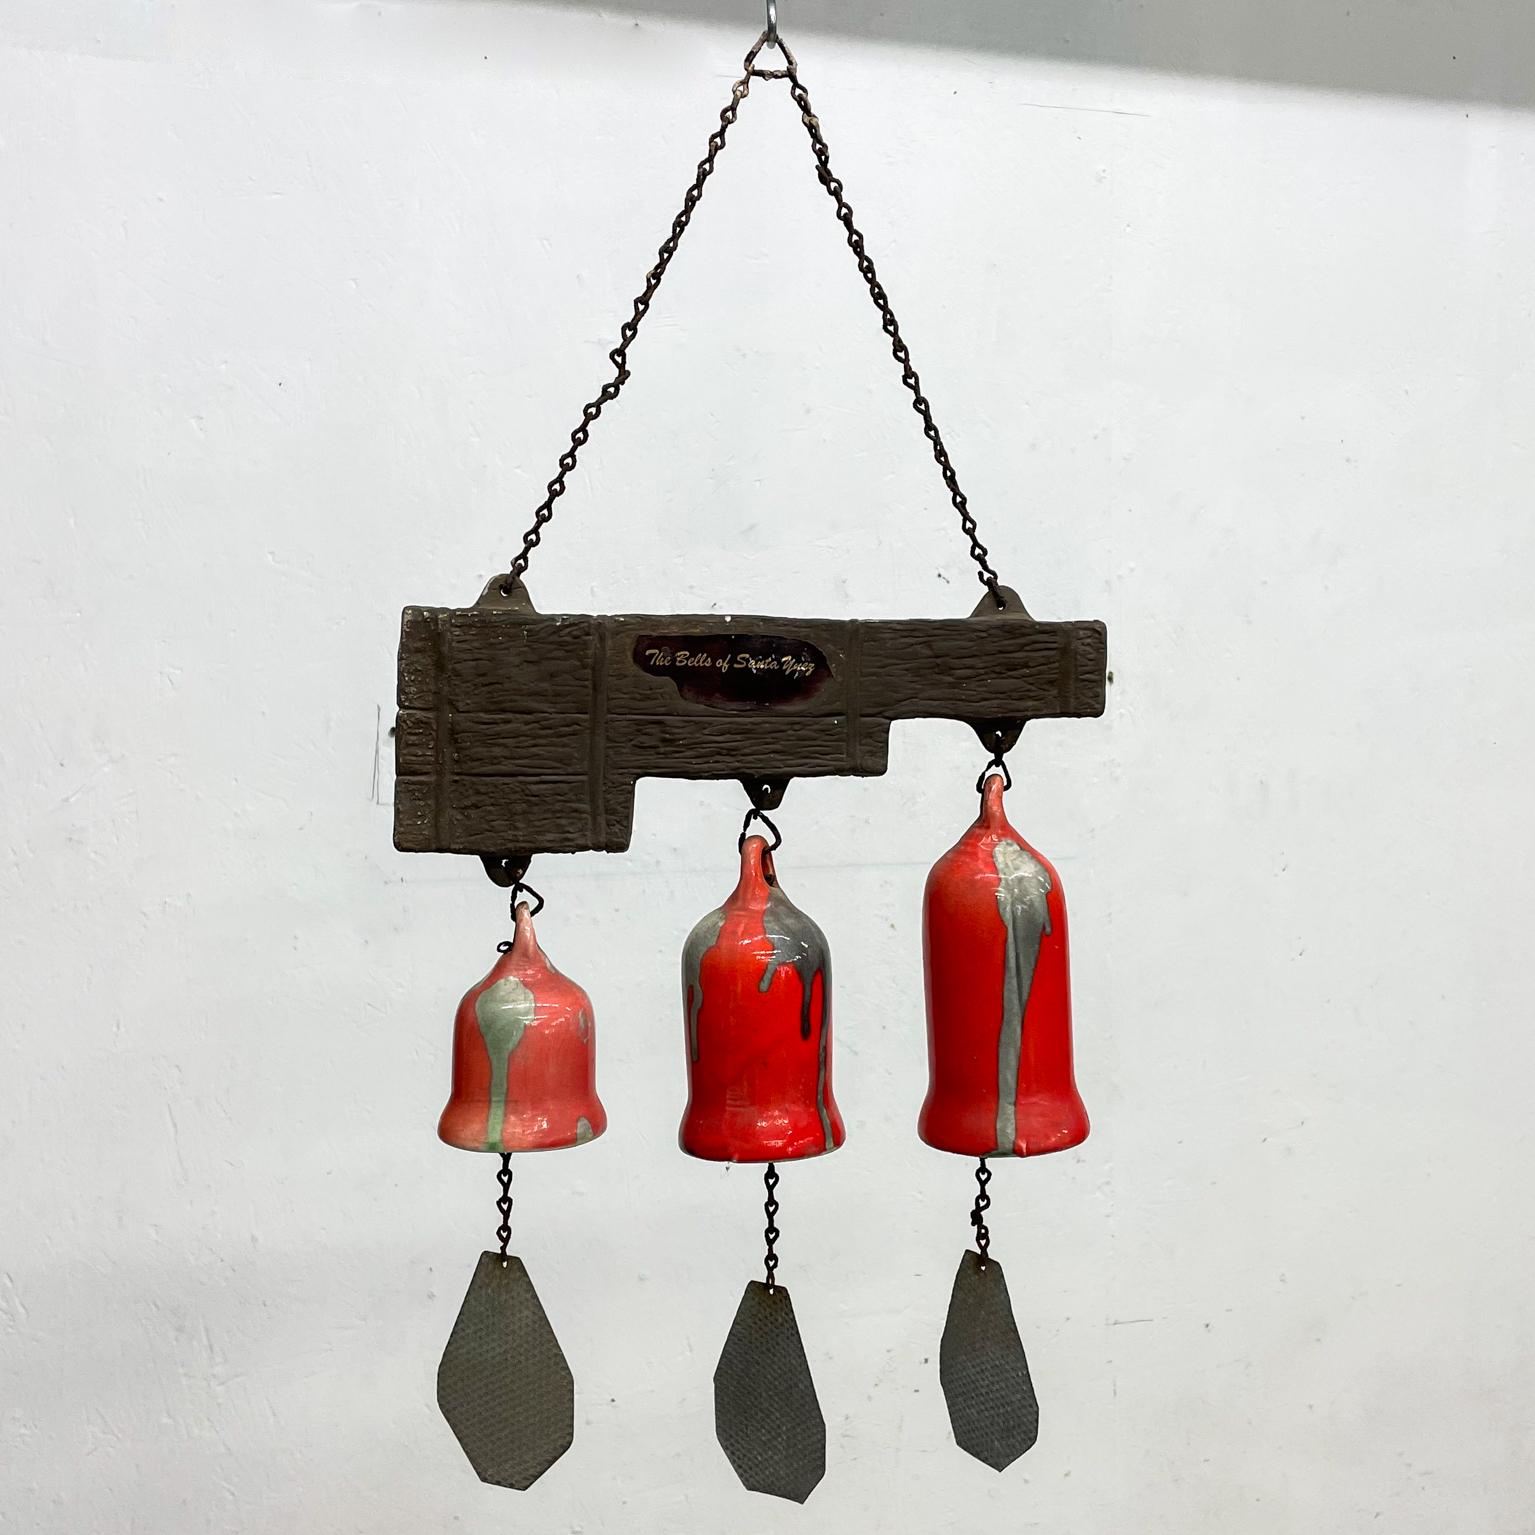 Three Bell Chime
Vintage hanging pottery wind chime bells of Santa Ynez California
Measures: 12.5 width x 26.25 tall x 3.25 diameter
Stamped Windchime, the Bells of Santa Ynez, Santa Barbara Ca
Three bells made in pottery, orange & brown